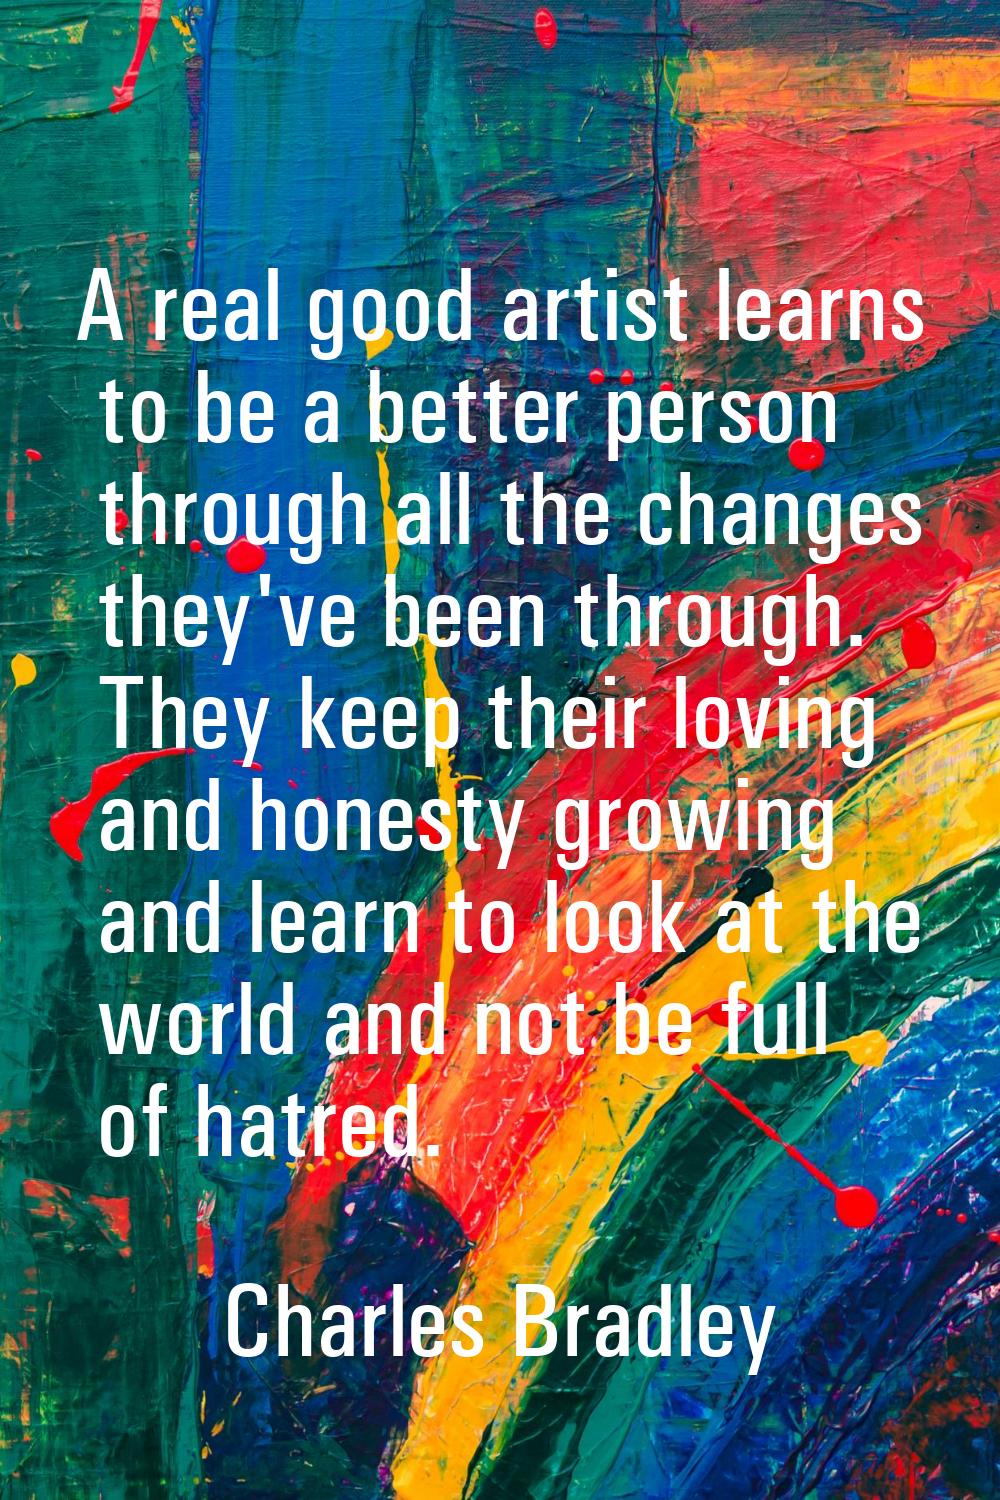 A real good artist learns to be a better person through all the changes they've been through. They 